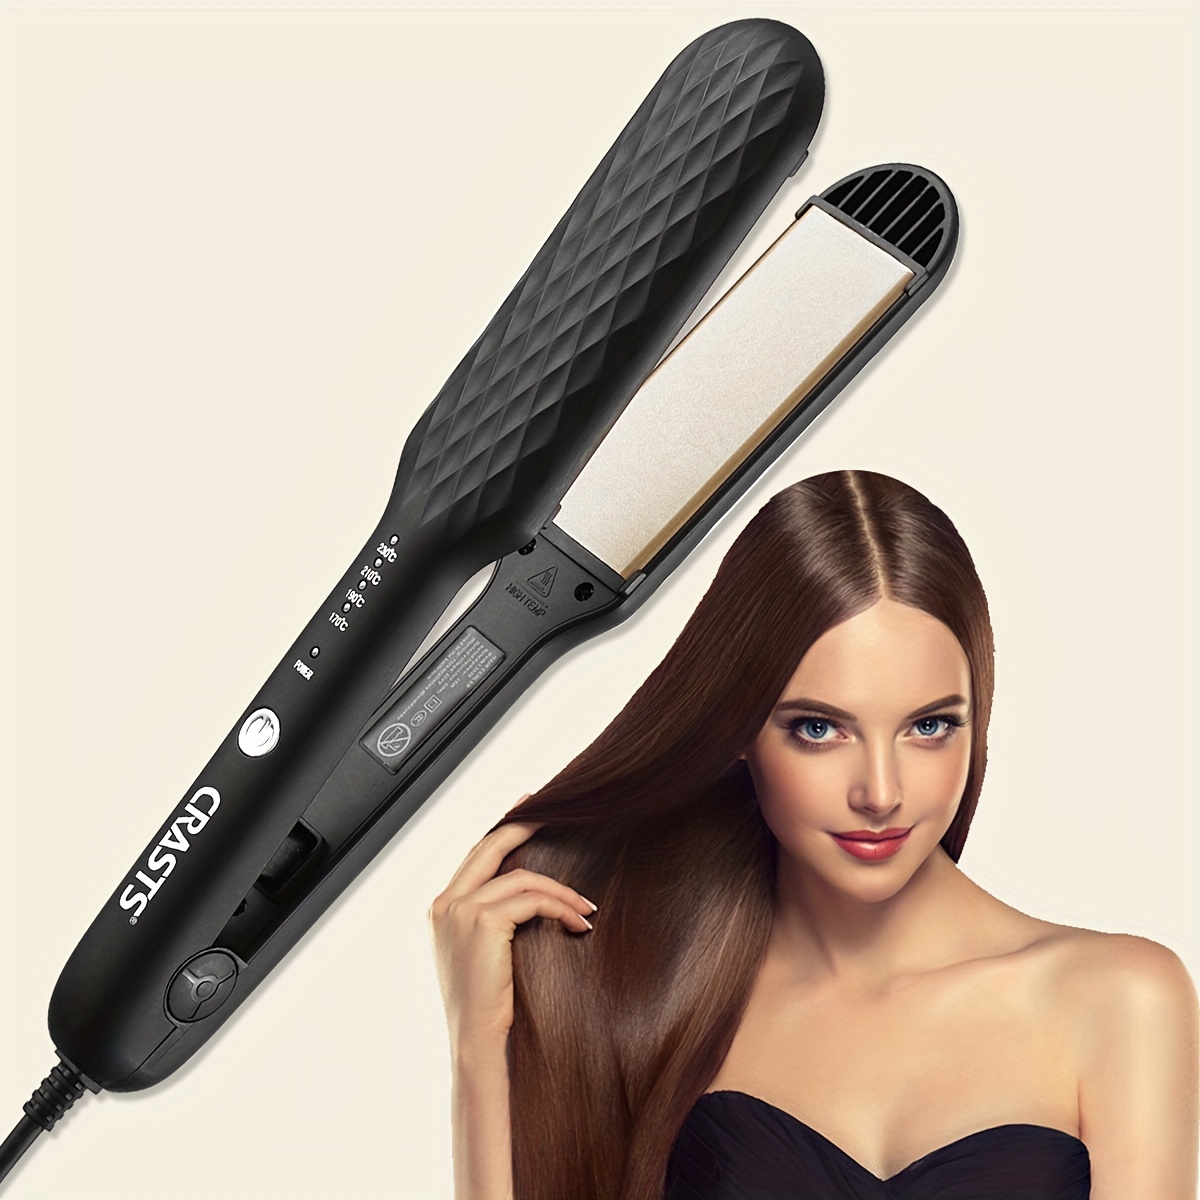 

Hair Straightening Flat Iron, Professional Hair Straightener Hair Curler, Diy Electric Hair Styling Tool For All Hair Types